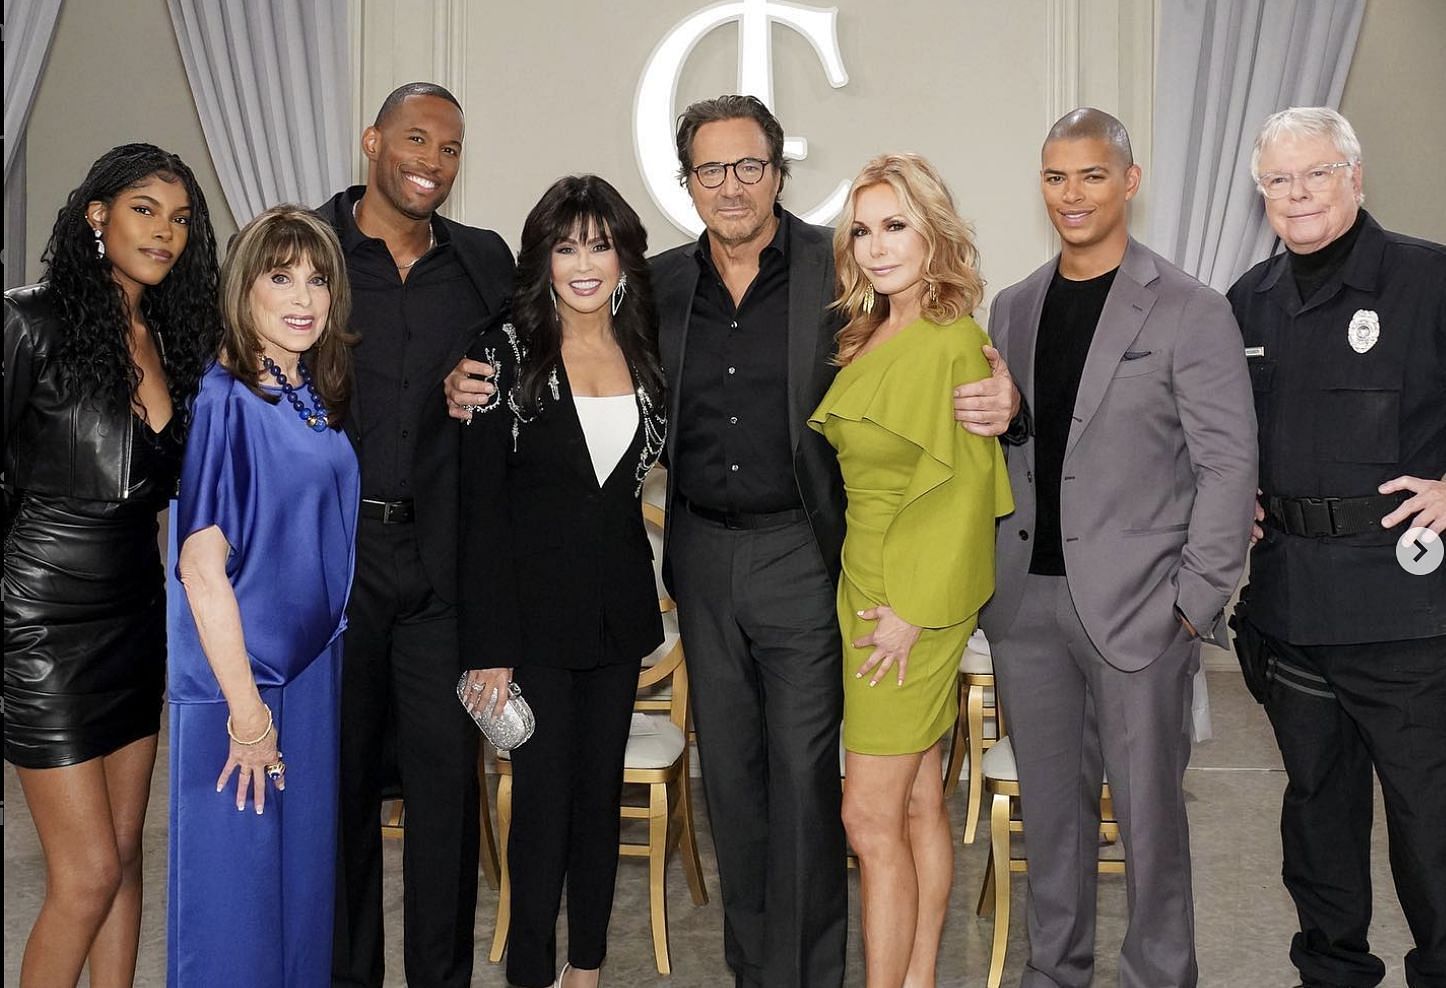 A still of the characters from the show. (Image via Instagram/@boldandthebeautifulcbs)